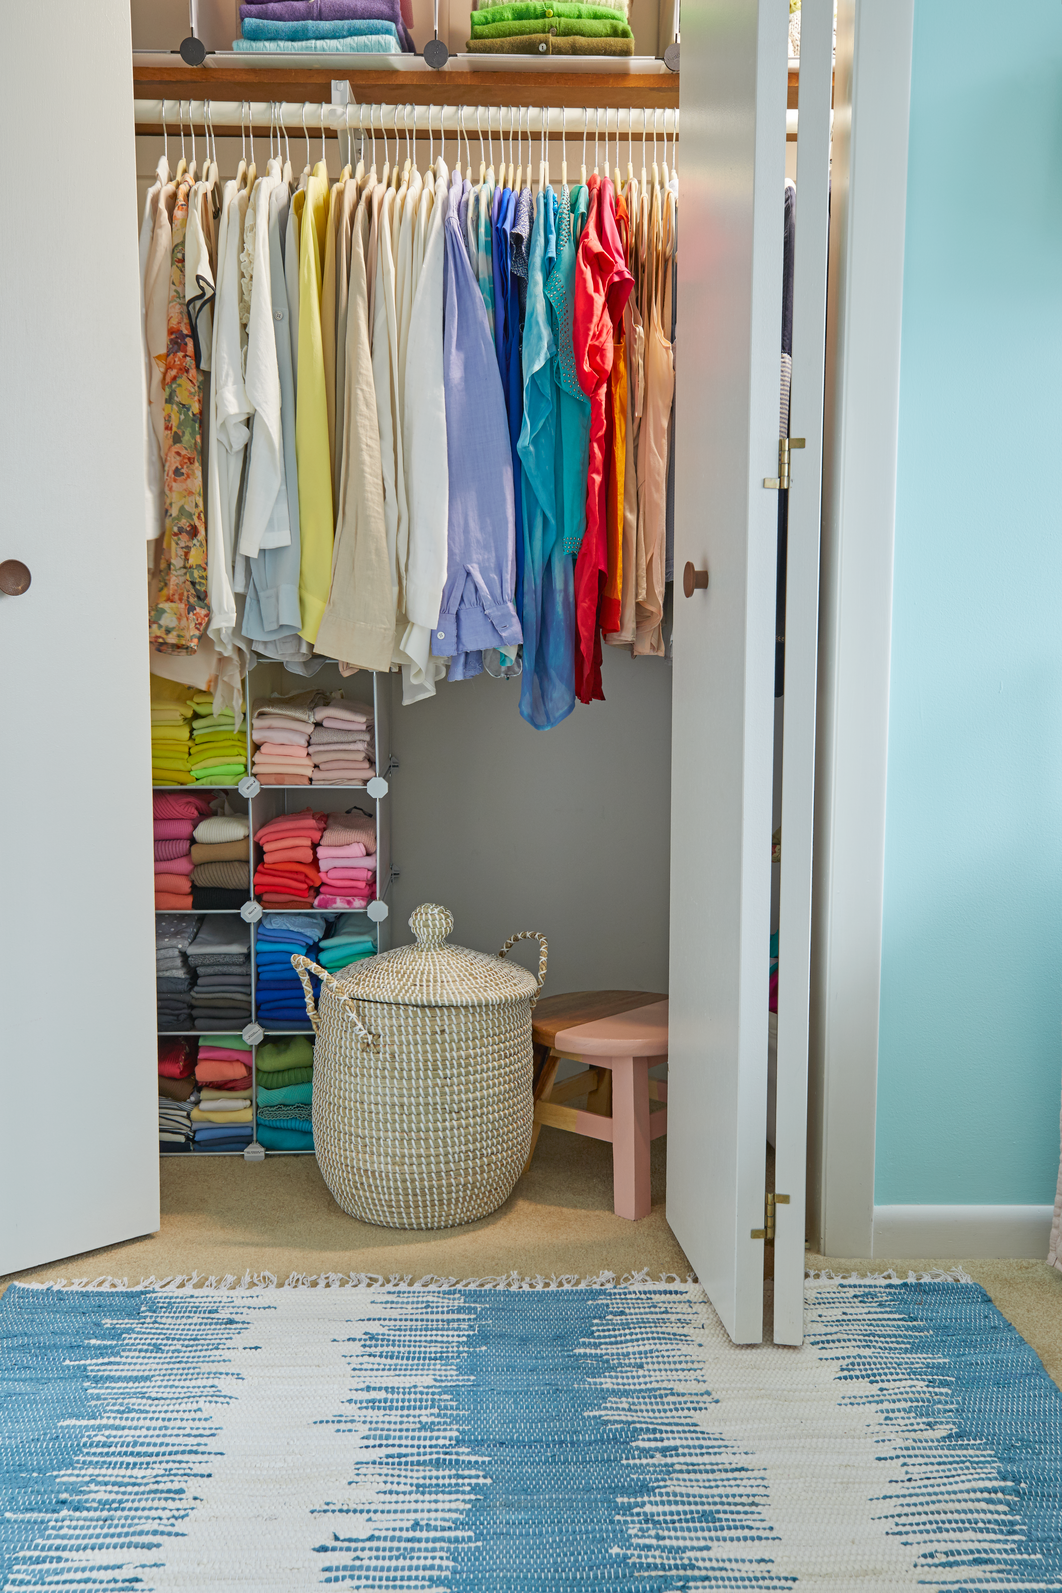 Open Closet Ideas - Full Of Surprises With Nowhere To Hide